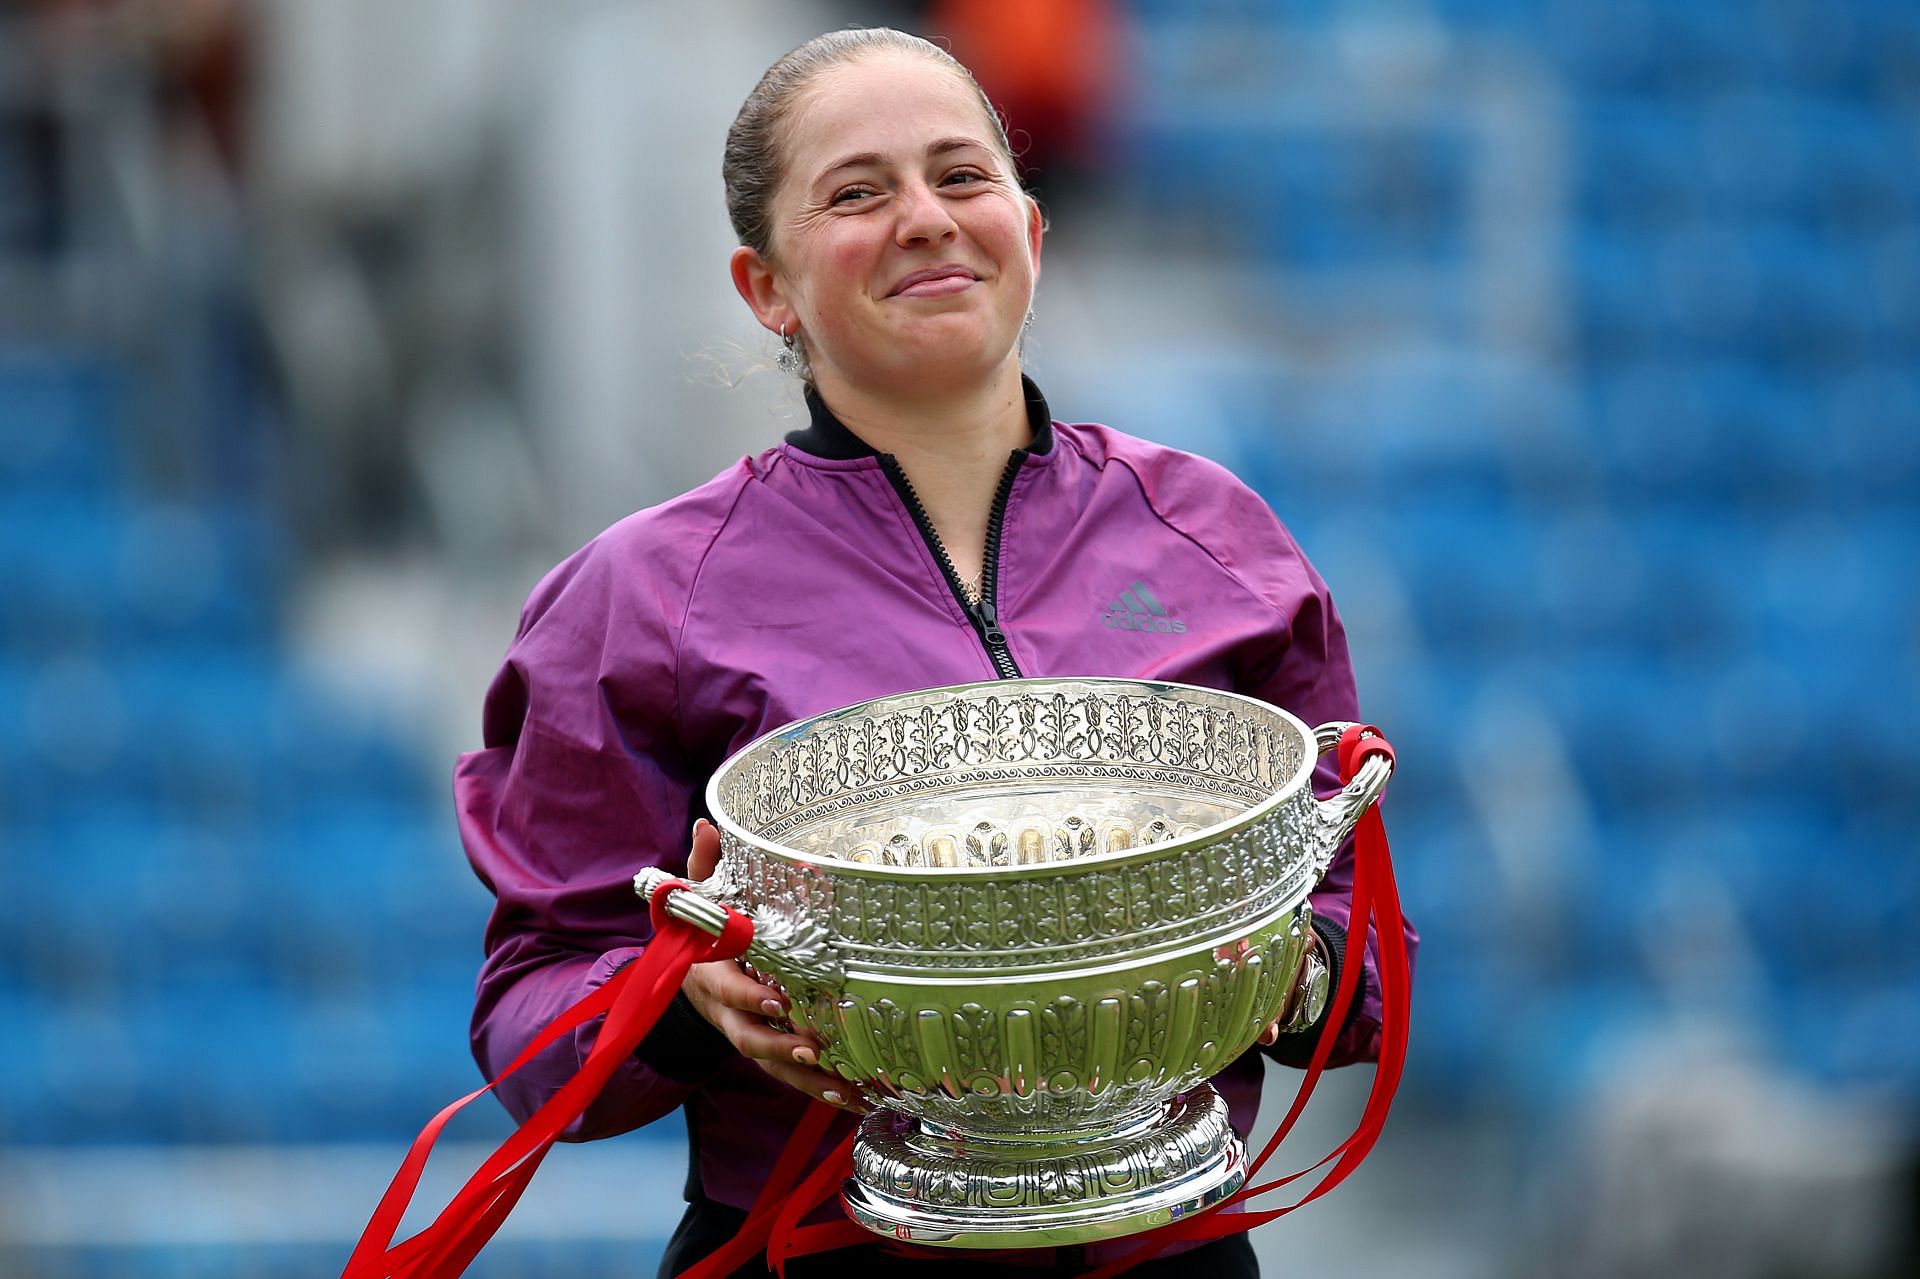 Jelena Ostapenko with the 2021 Eastbourne trophy